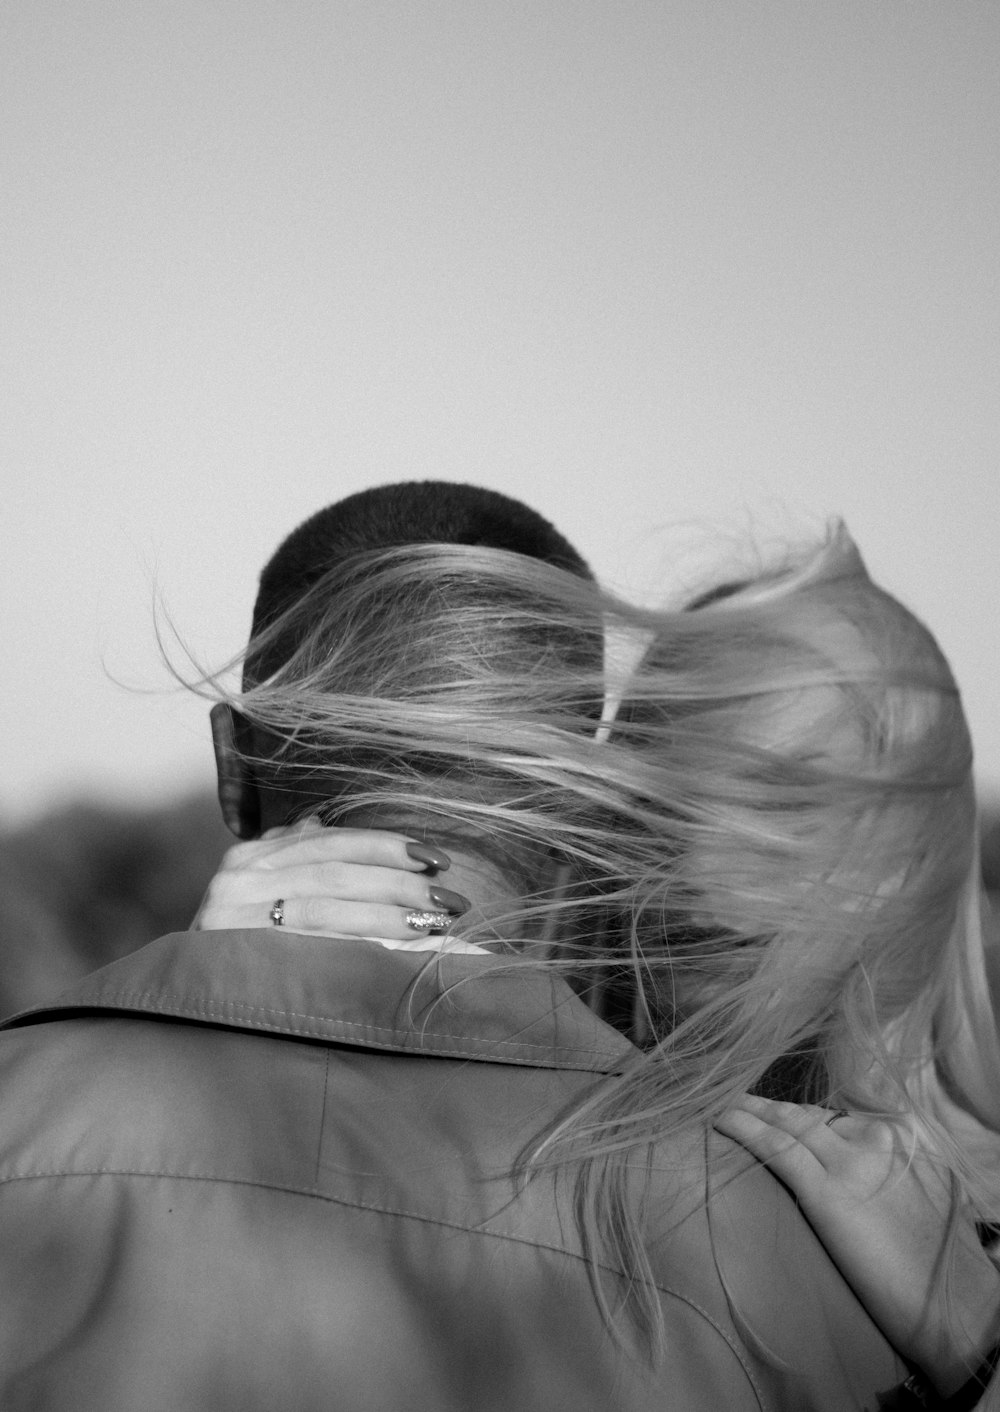 a man and woman embracing each other in a black and white photo